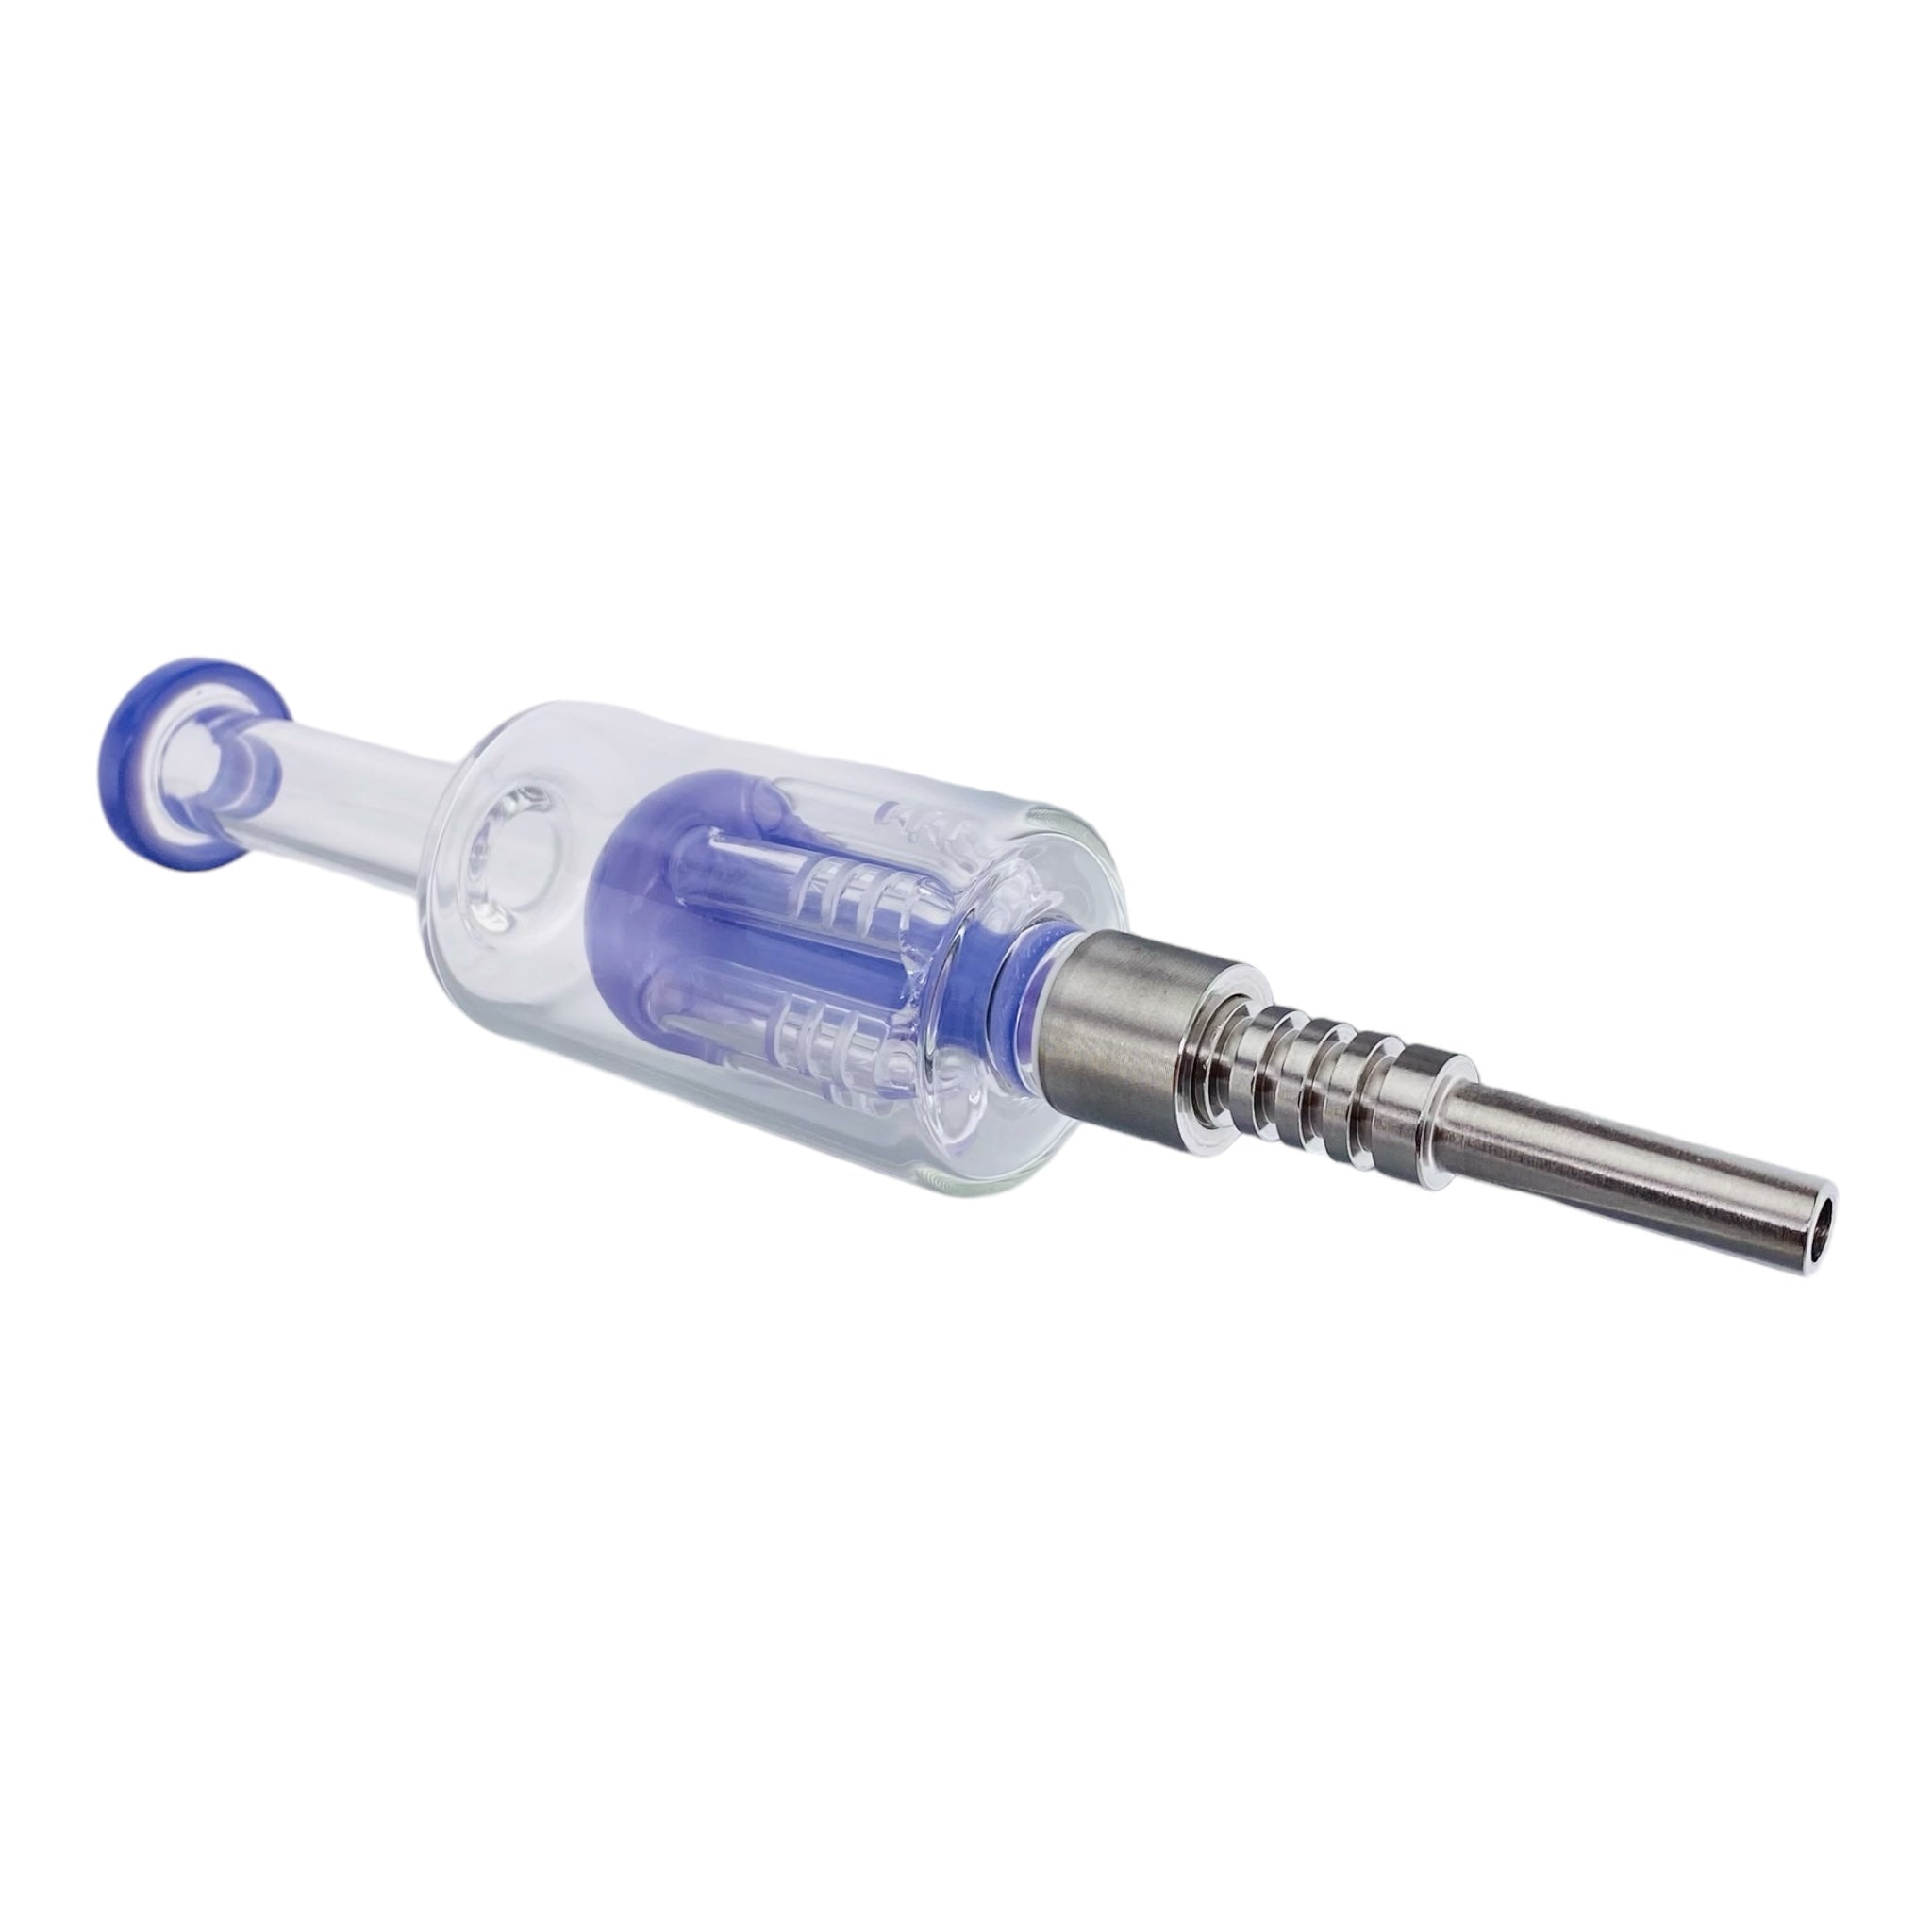 Purple Nectar Collector With Tree Perc And Threaded Metal Tip